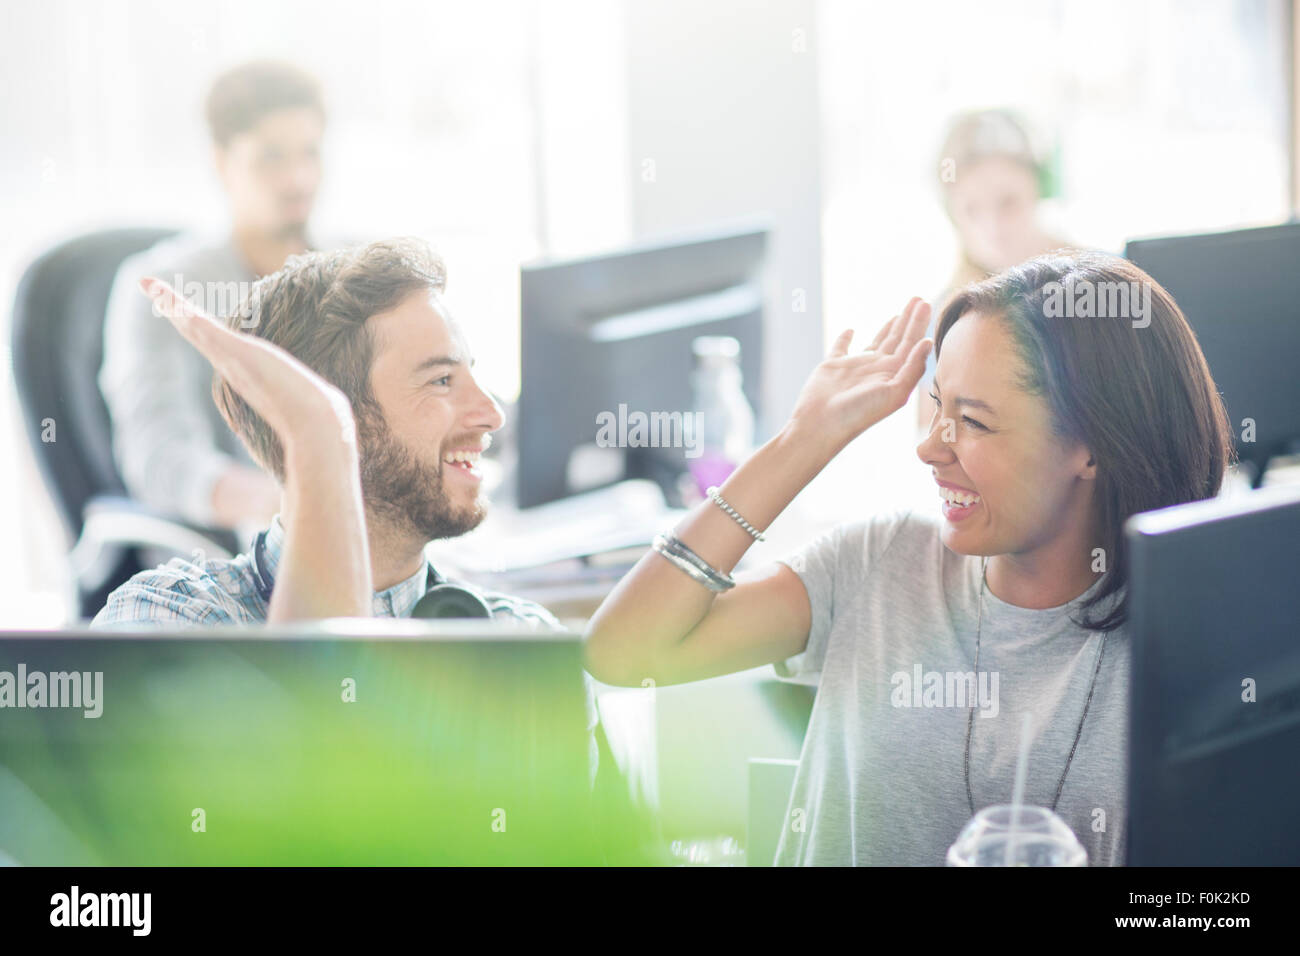 Enthusiastic business people high fiving in office Stock Photo